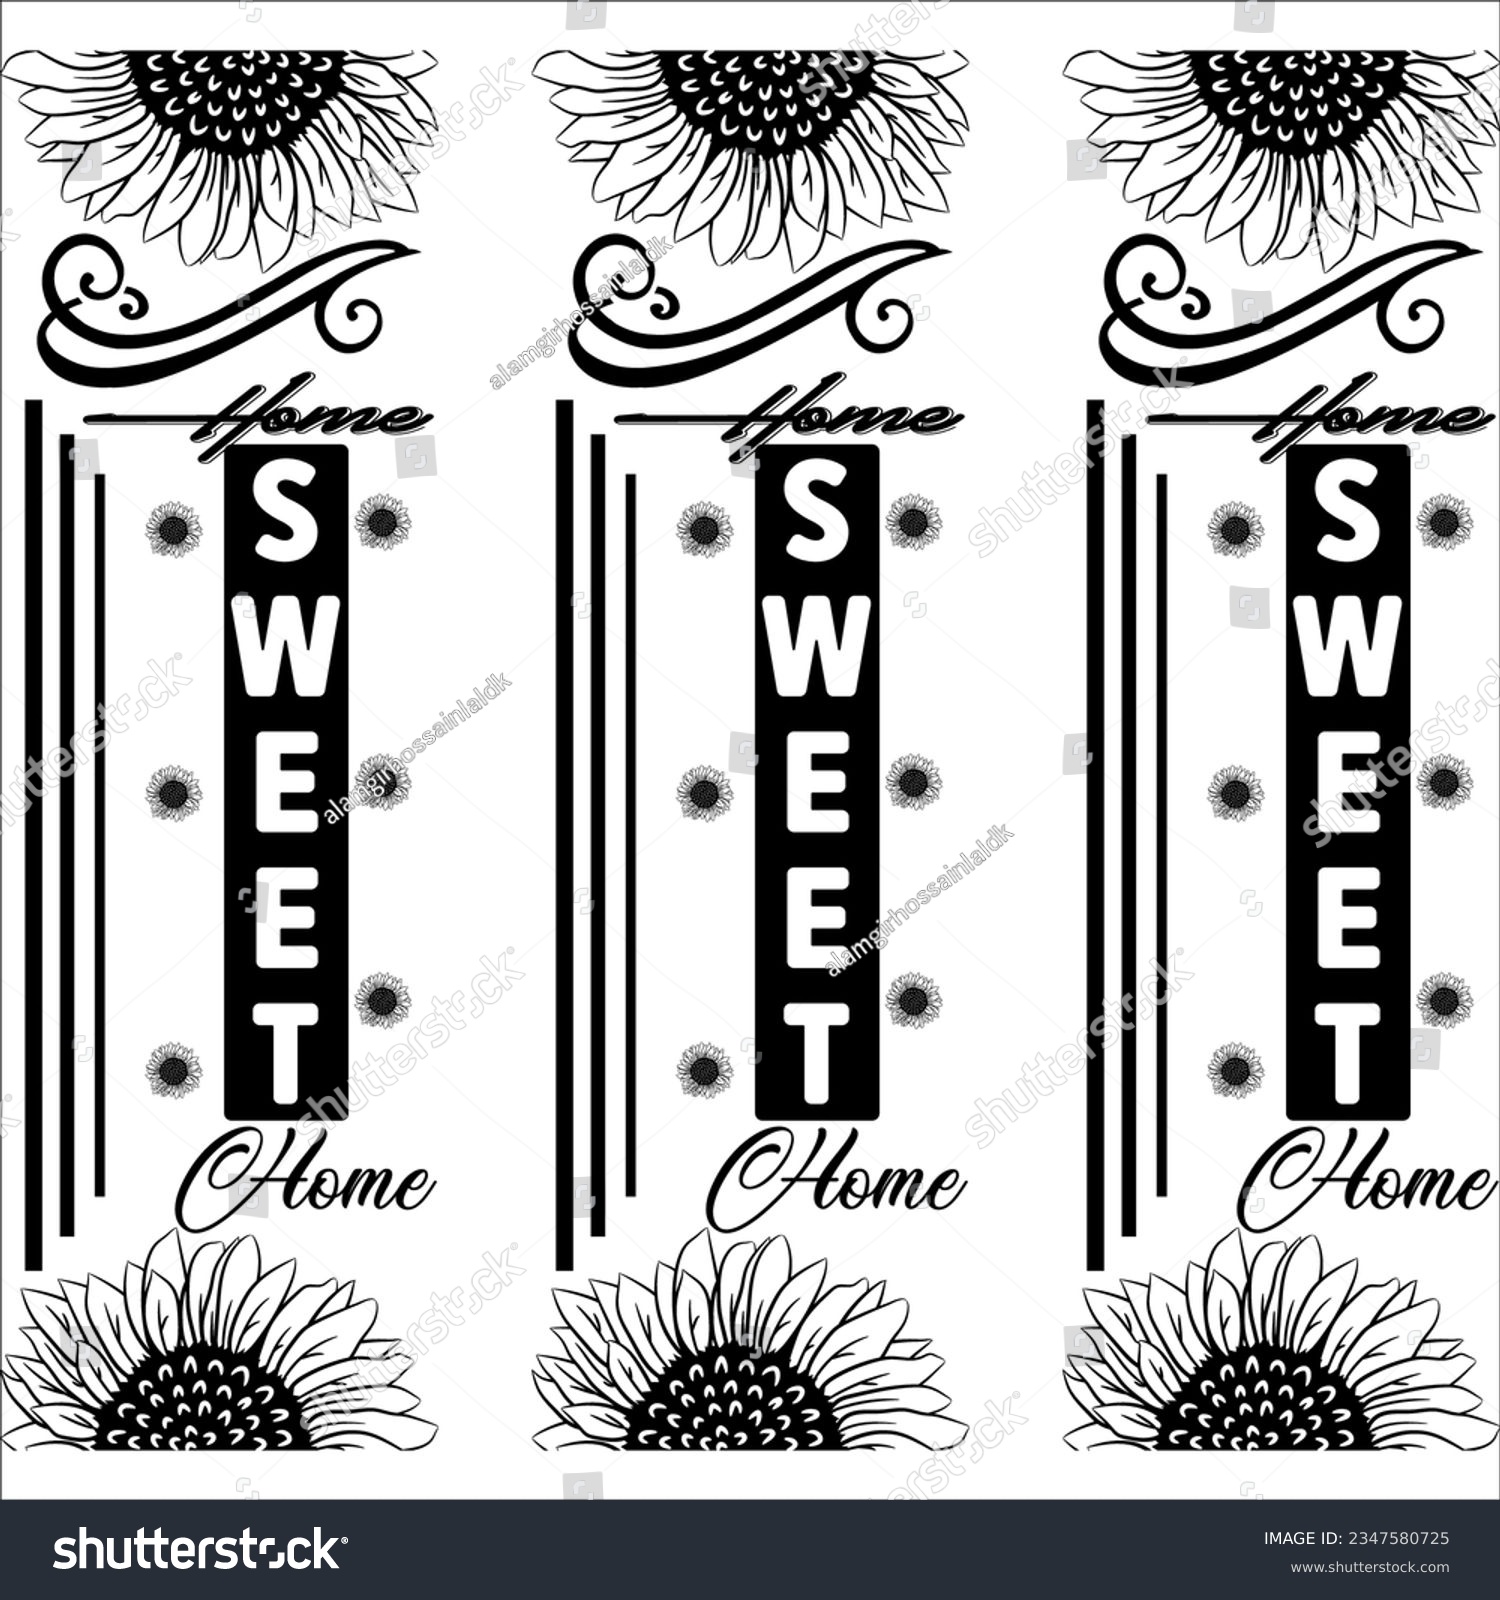 SVG of Home sweet home 2 t-shirt design. Here You Can find and Buy t-Shirt Design. Digital Files for yourself, friends and family, or anyone who supports your Special Day and Occasions. svg